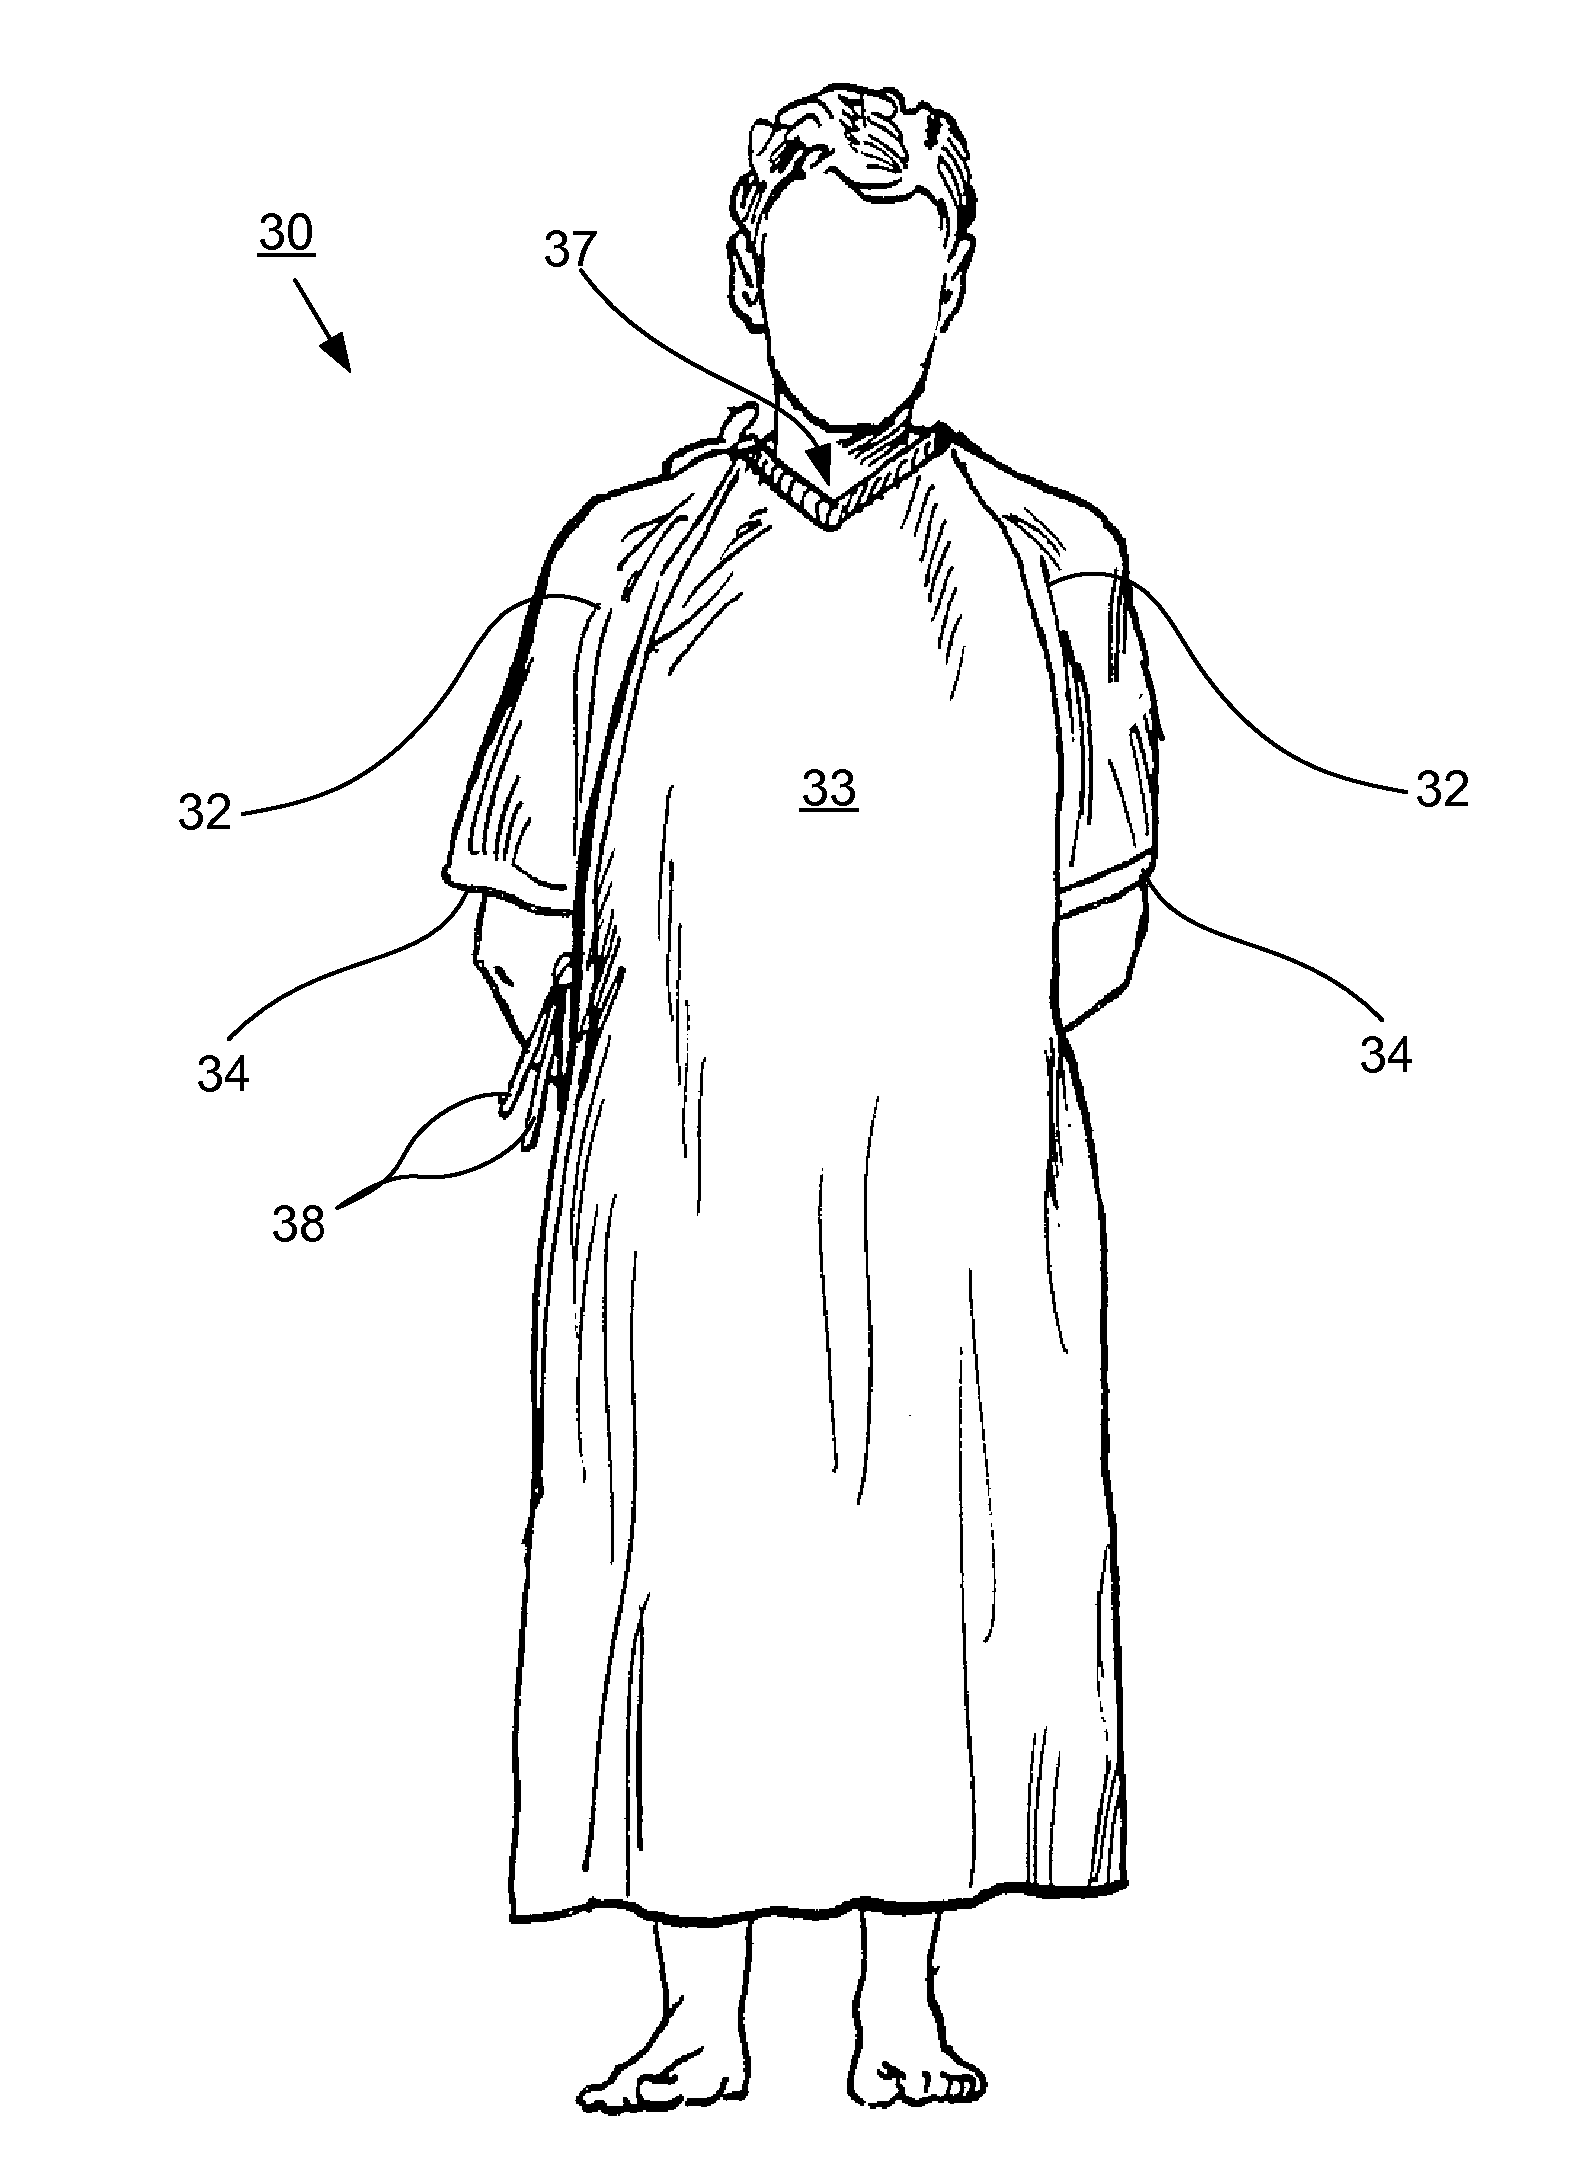 Synthetic woven patient gown for preventing and reducing skin wounds